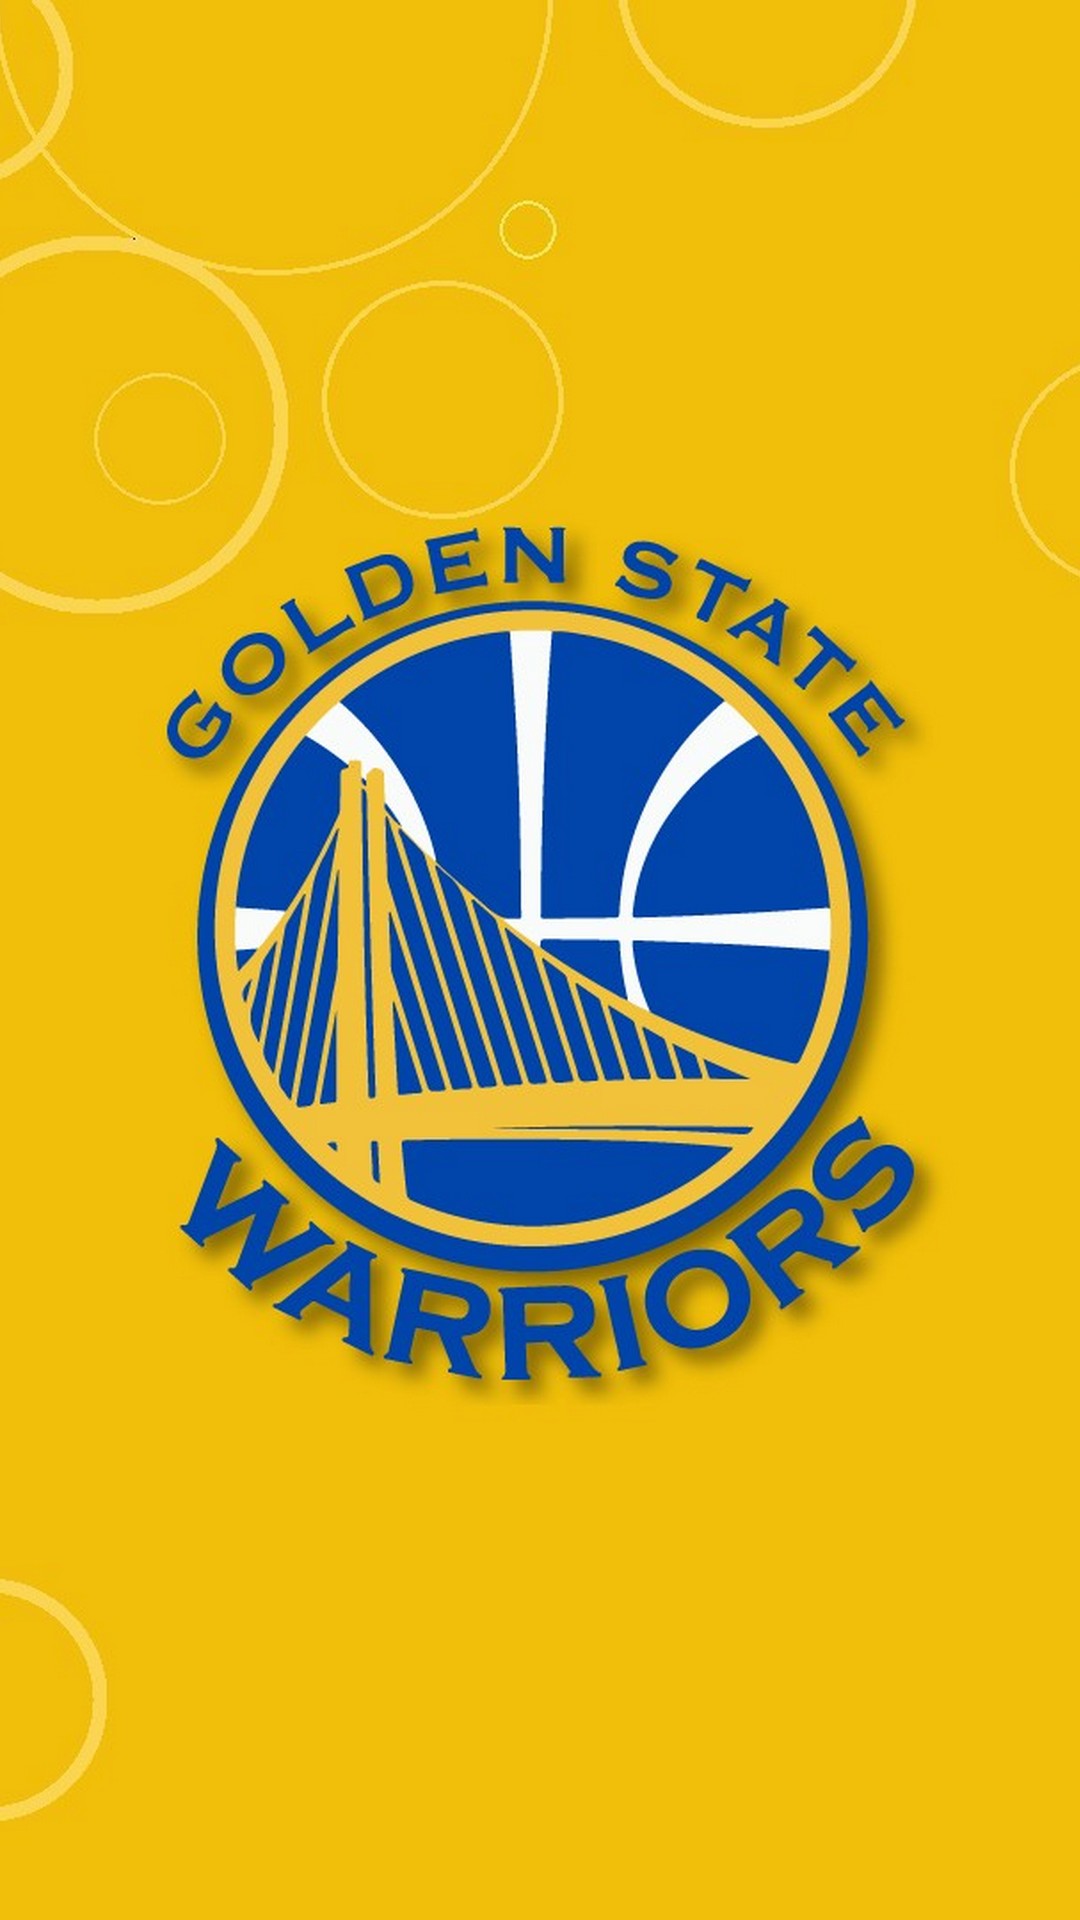 Wallpaper Android Golden State Warriors